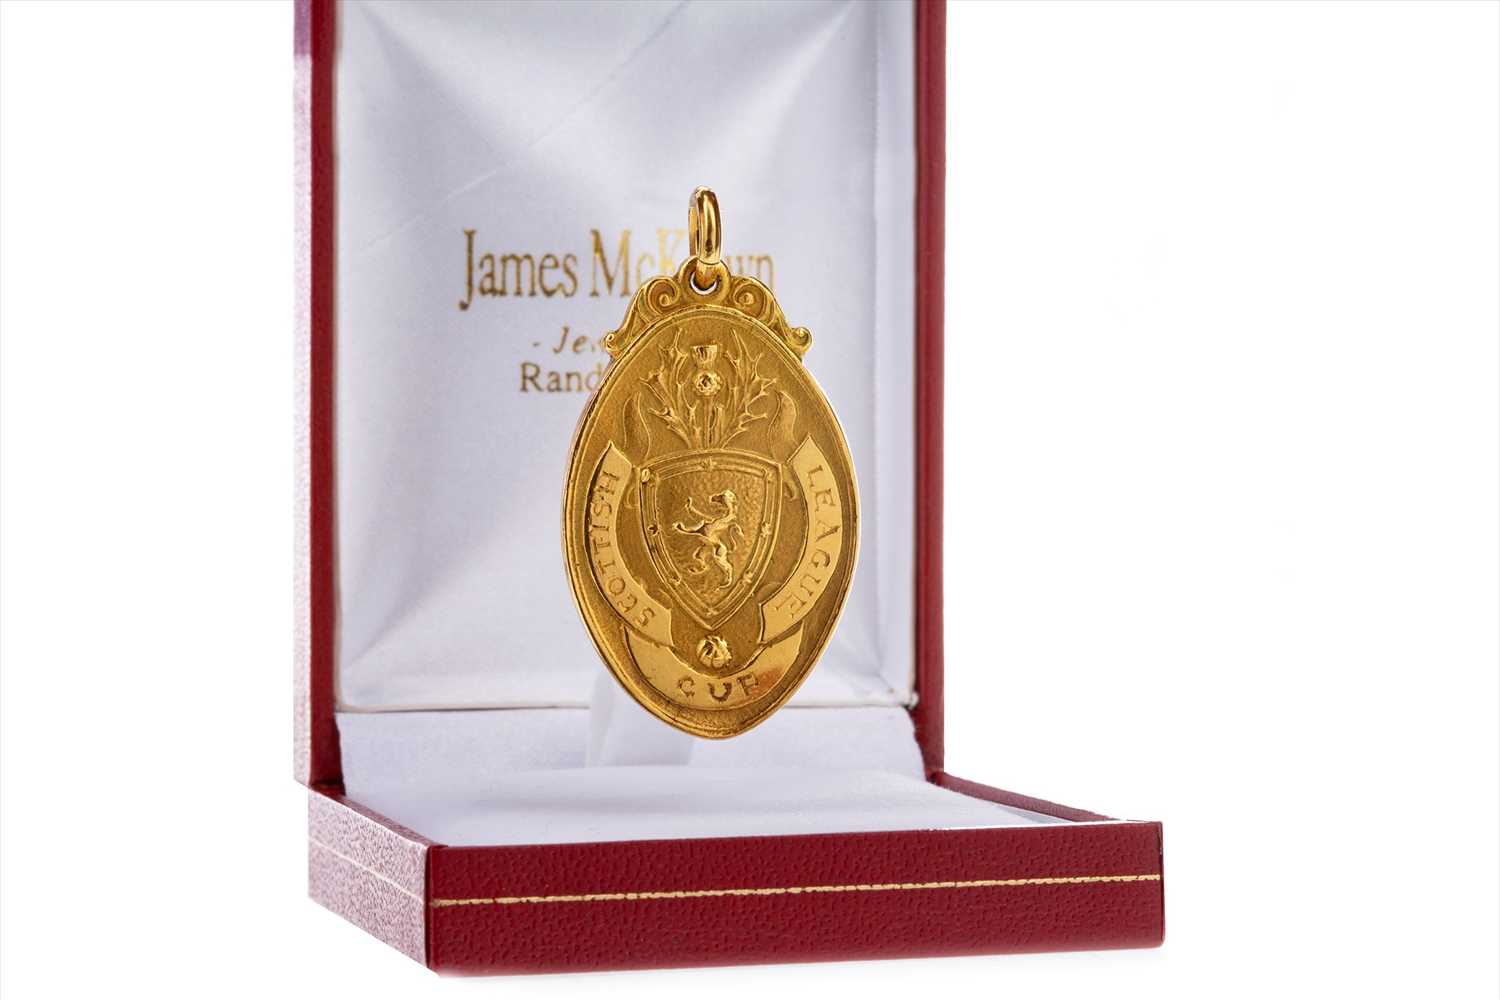 Lot 1709 - A SCOTTISH LEAGUE CUP GOLD MEDAL 1957 WON BY CELTIC F.C.